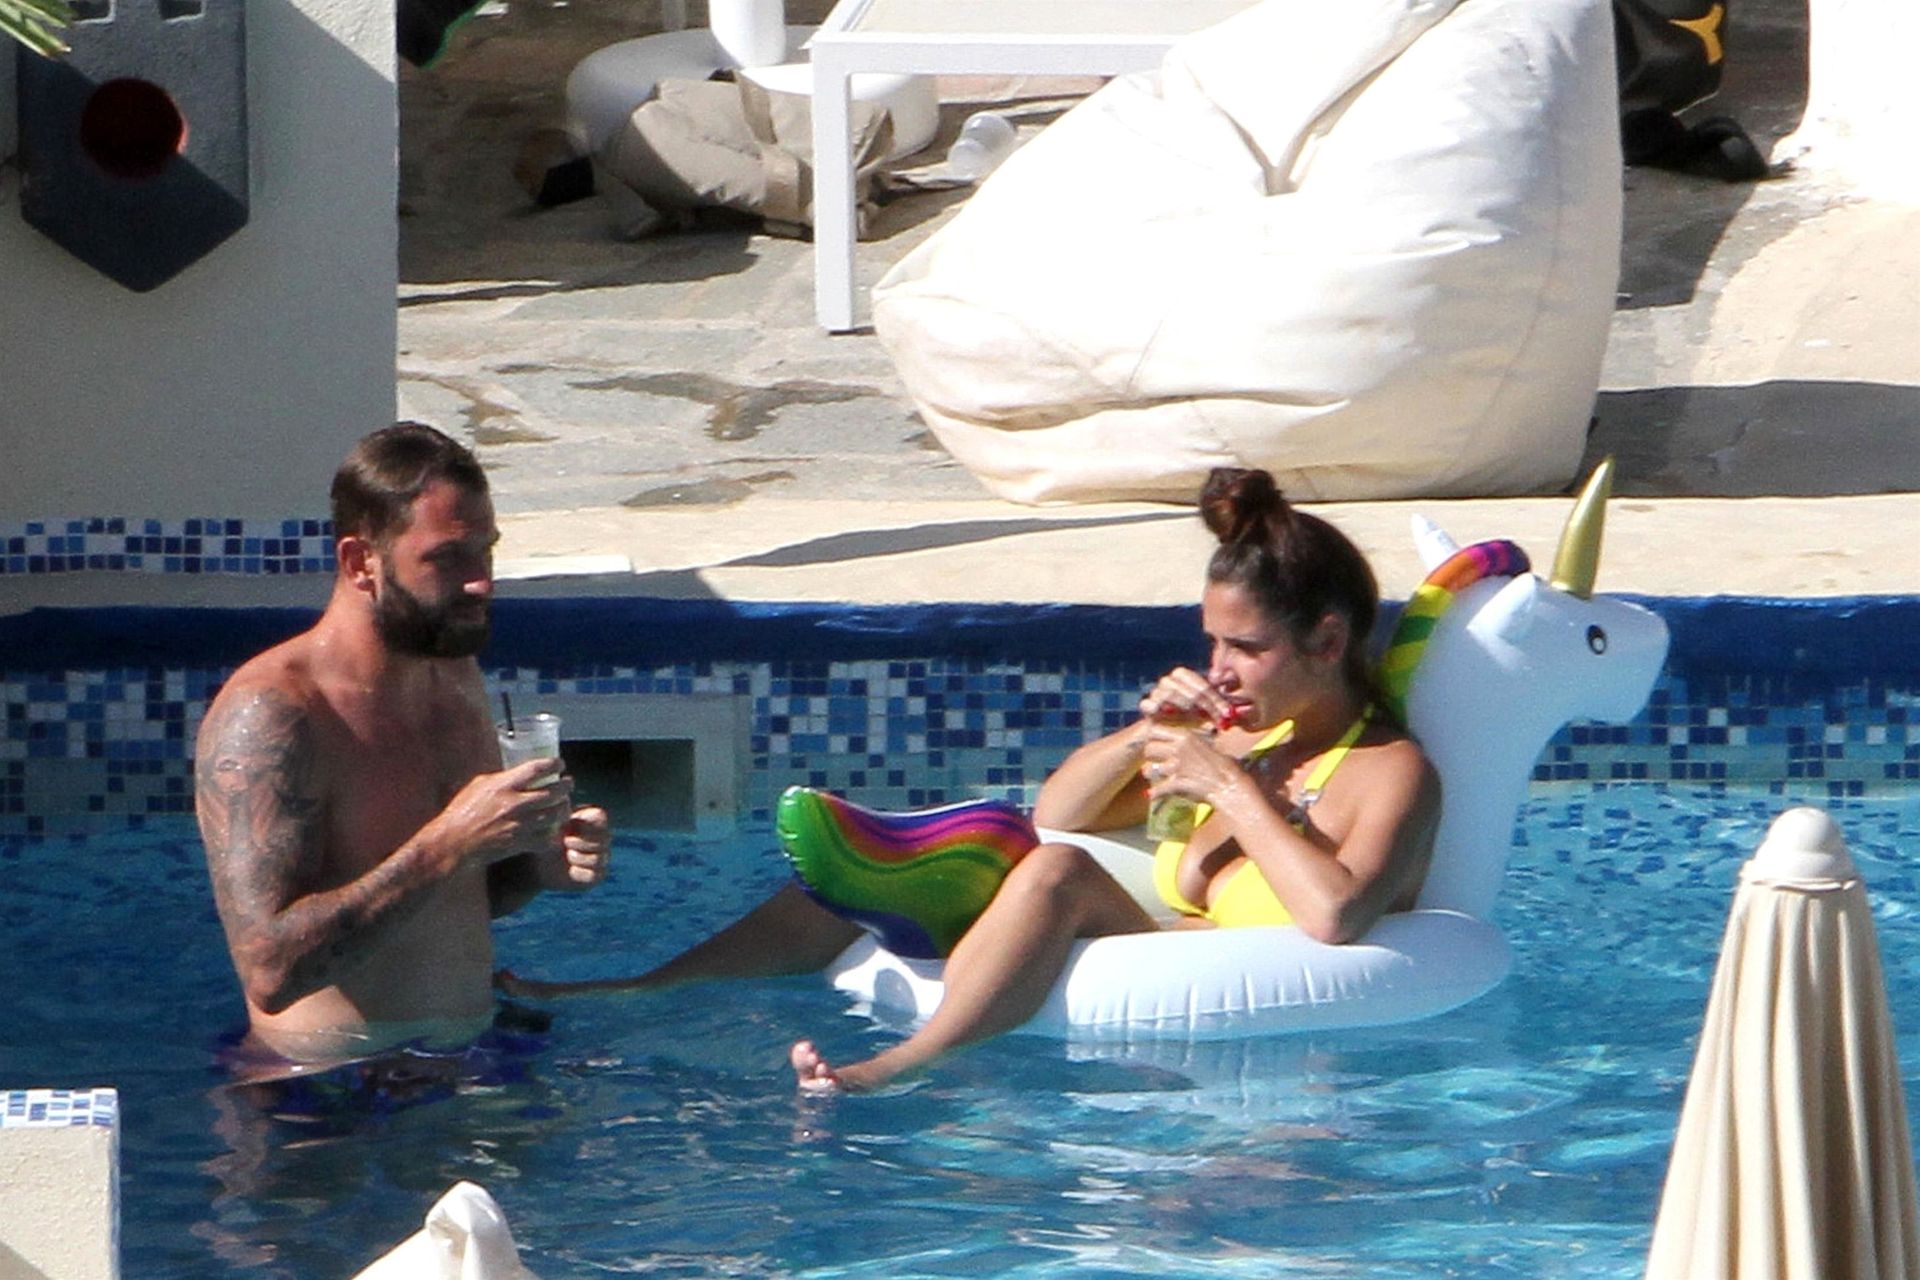 Oliver Kragl & Alessia Macari Relax Poolside in Benevento (33 Photos)